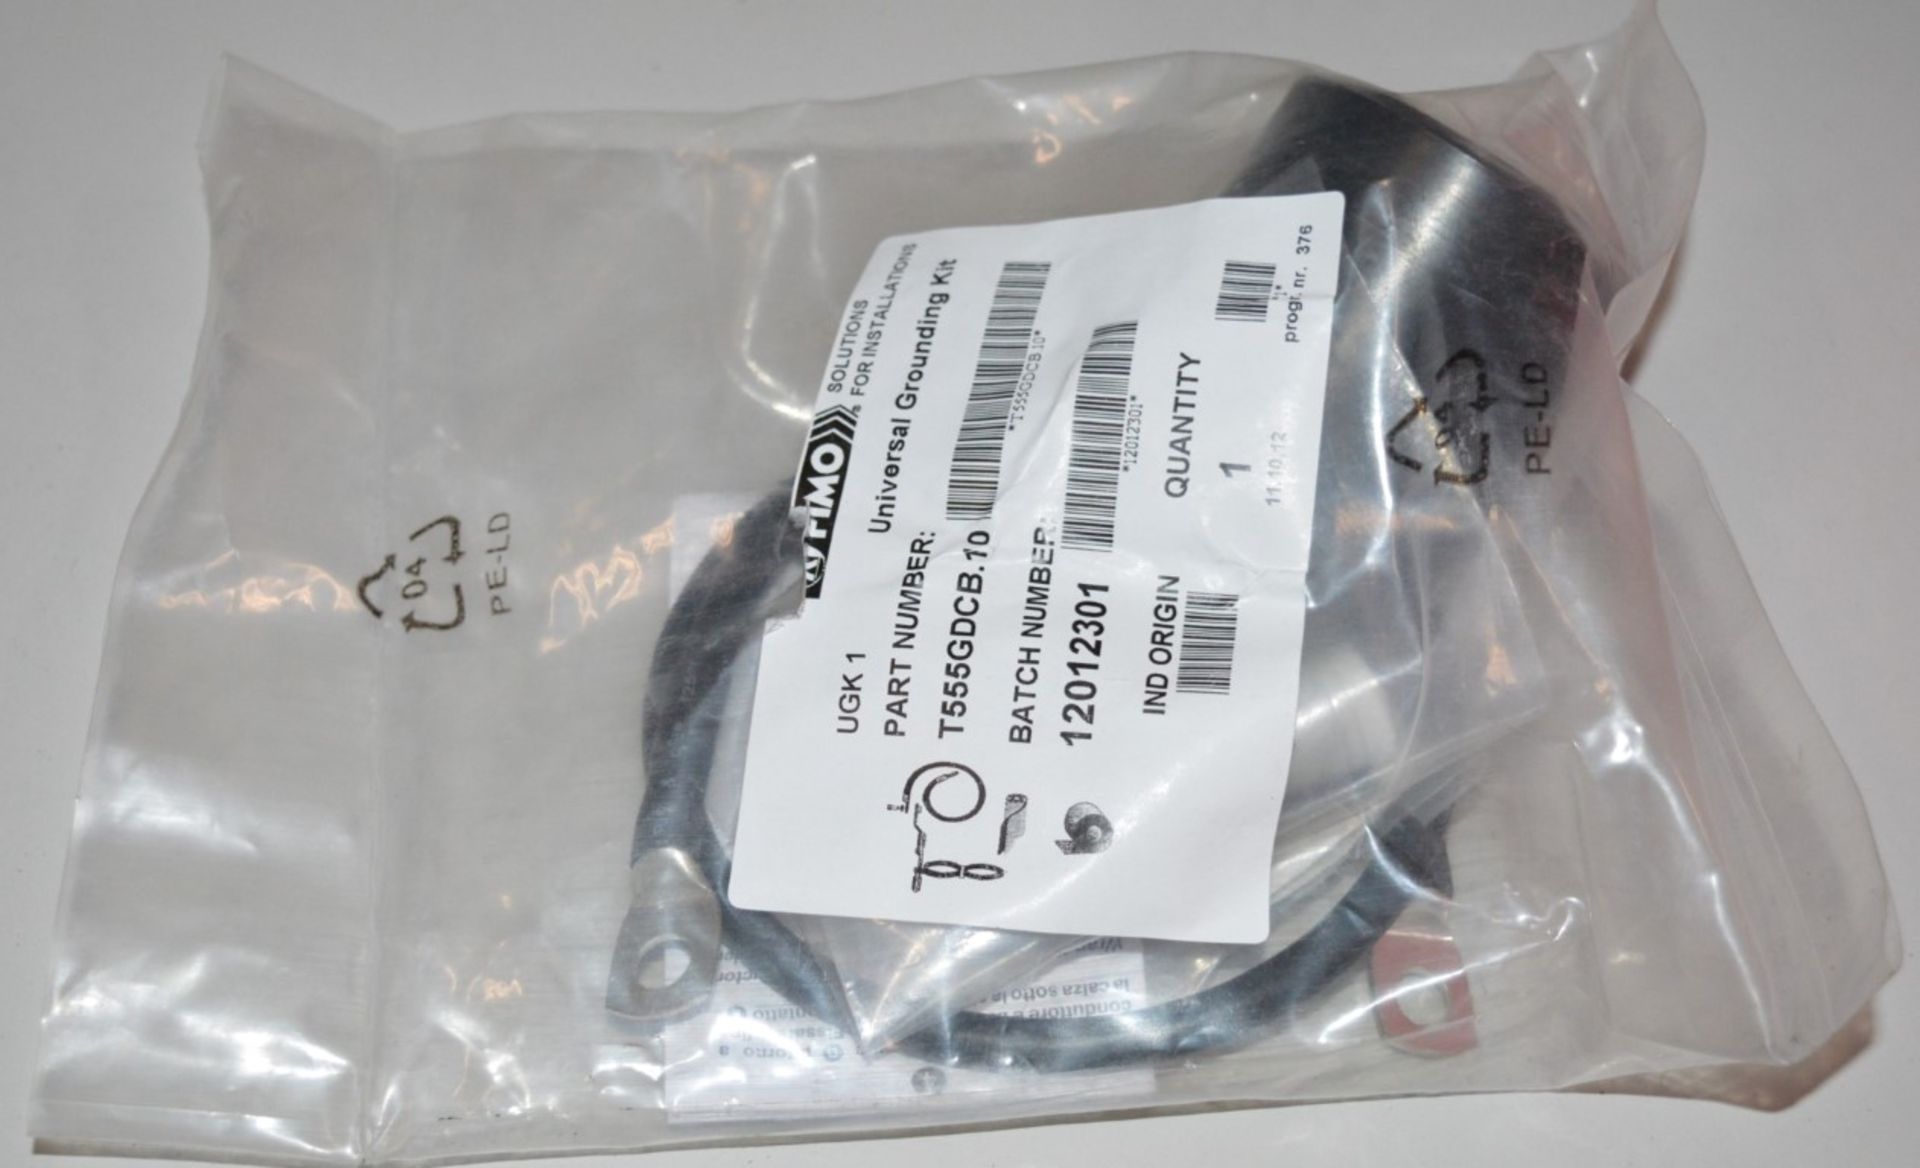 8 x Fimo Universal Grounding Kits - Part Number T555GDCB.10 - Brand New in Packets - Please See - Image 4 of 8